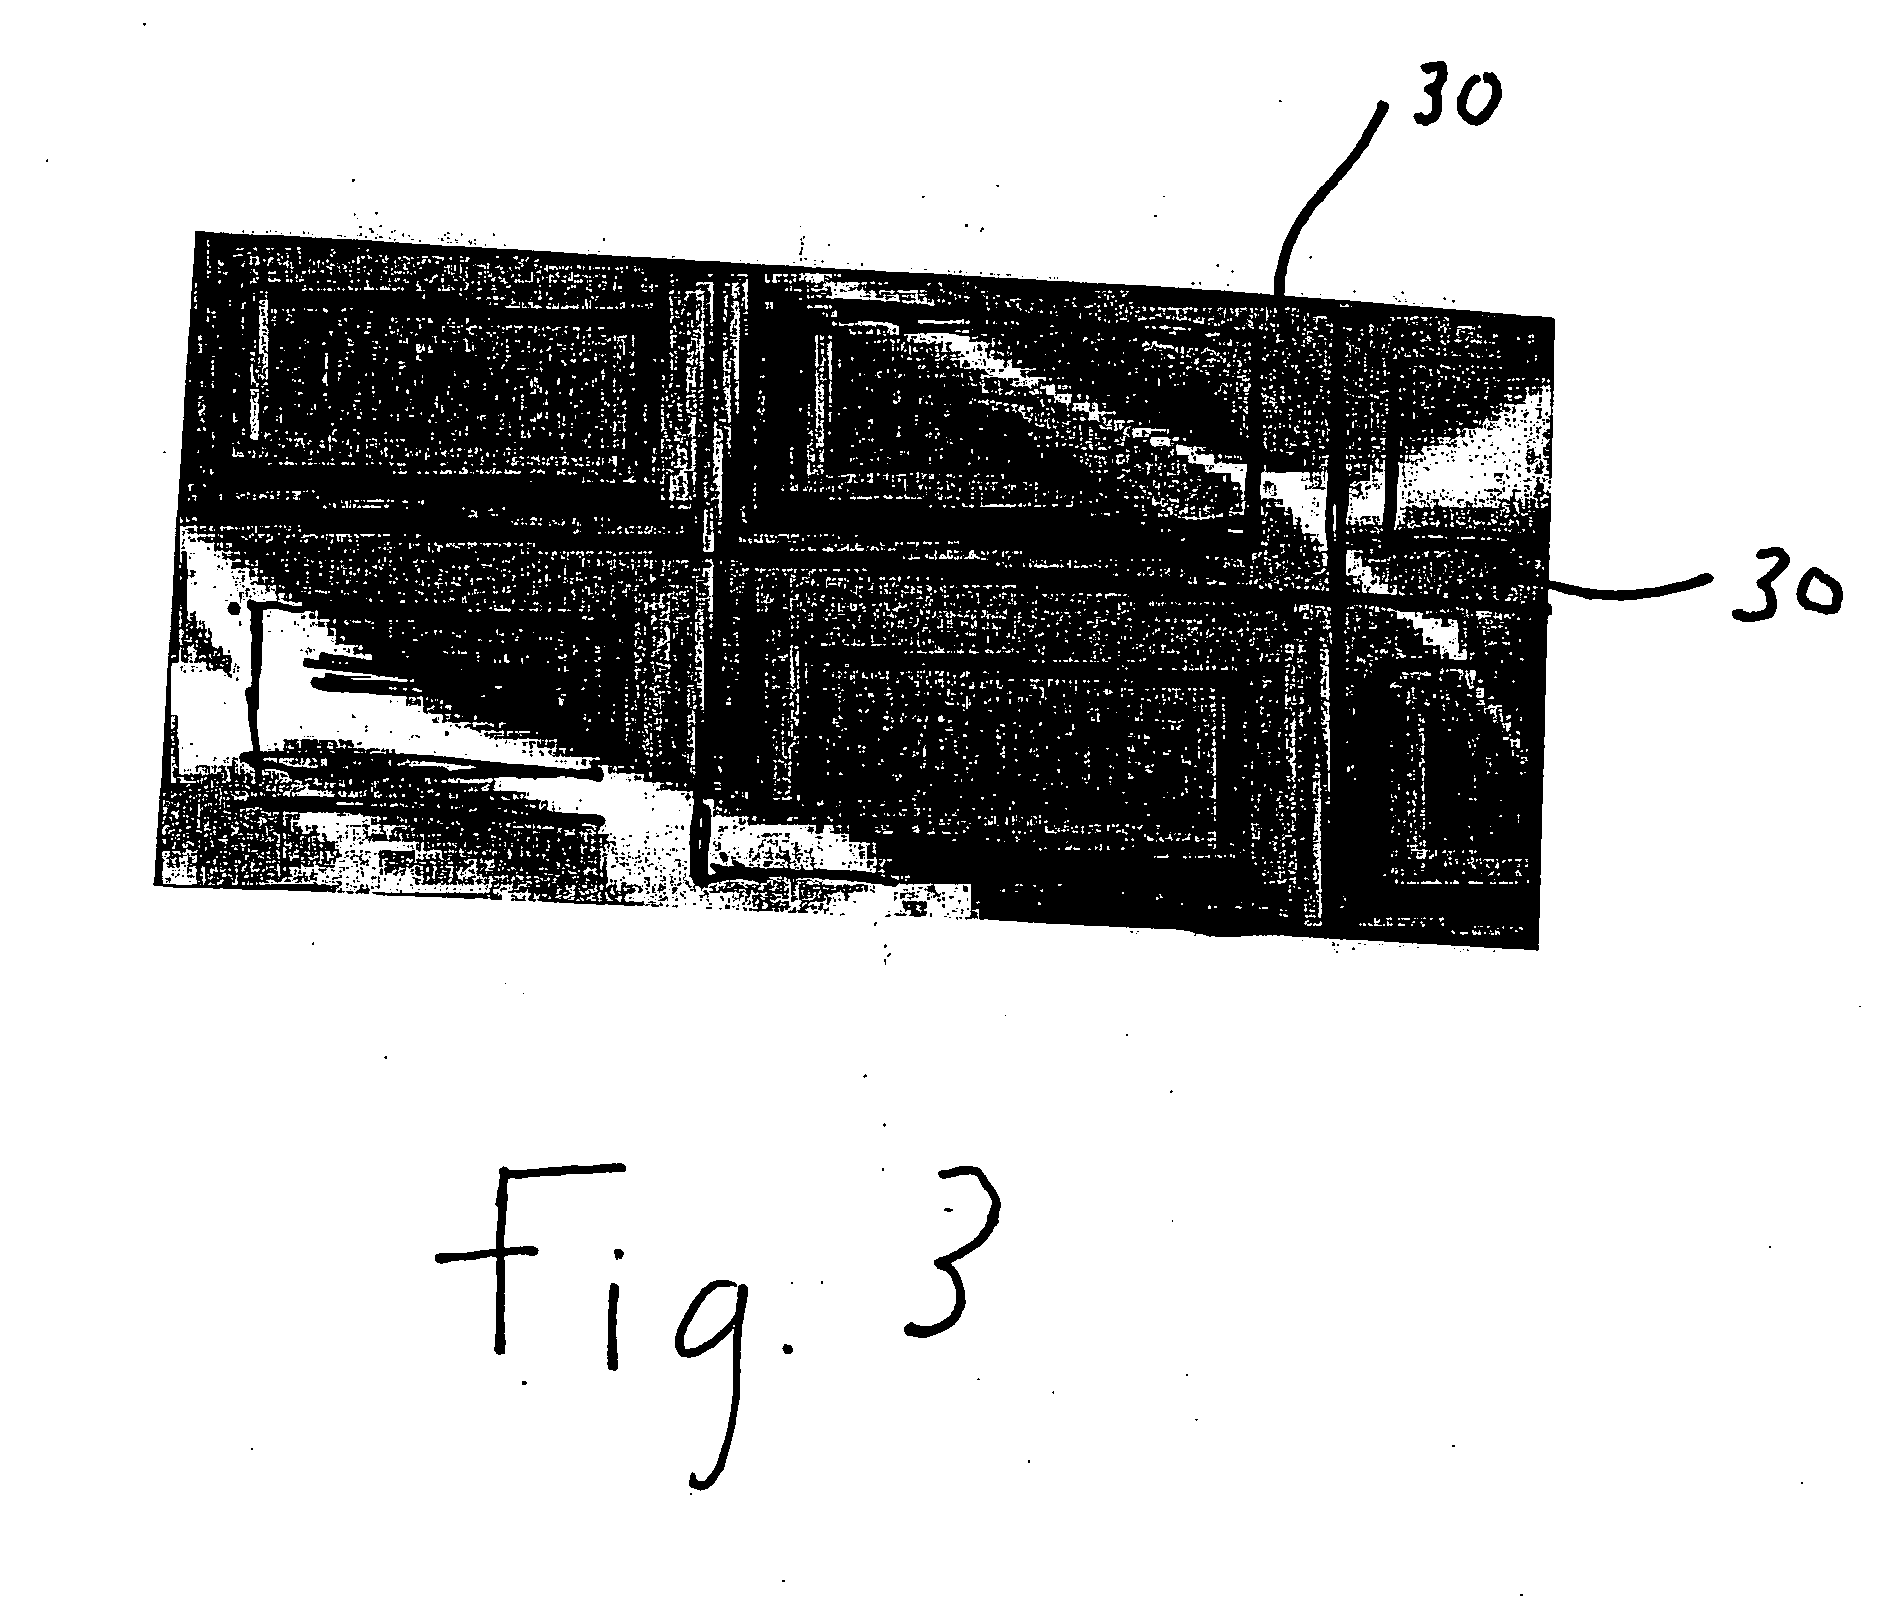 Cleaning composite comprising lines of frangibility